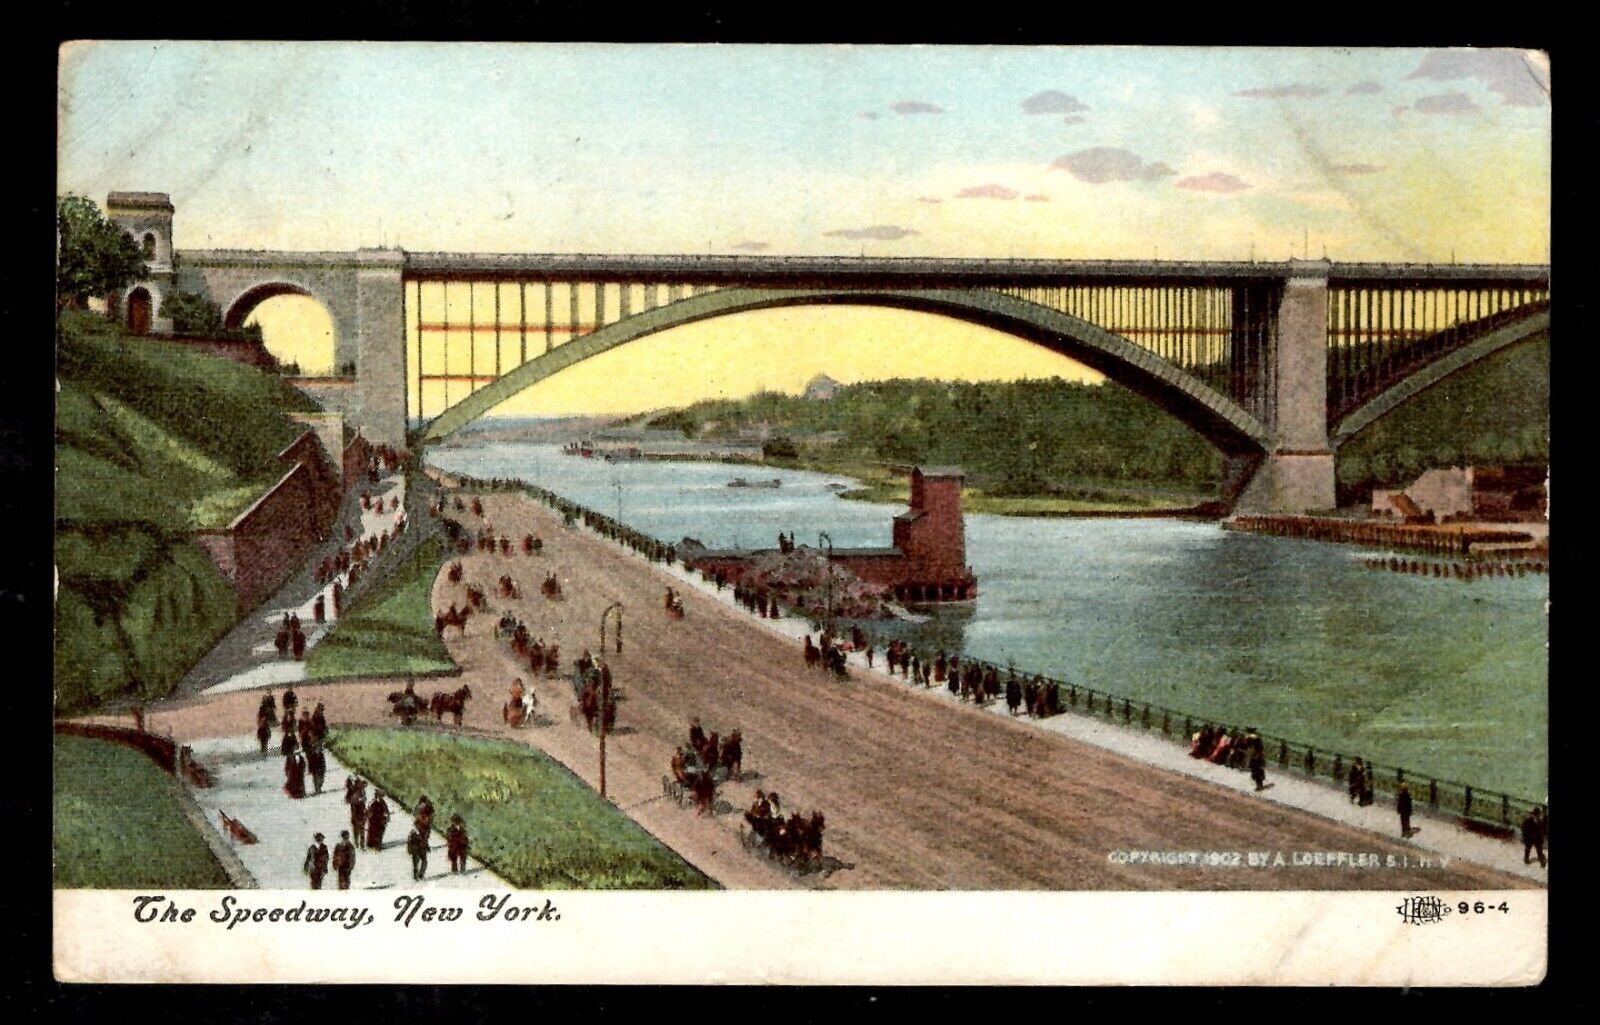 The Speedway, New York Post Card